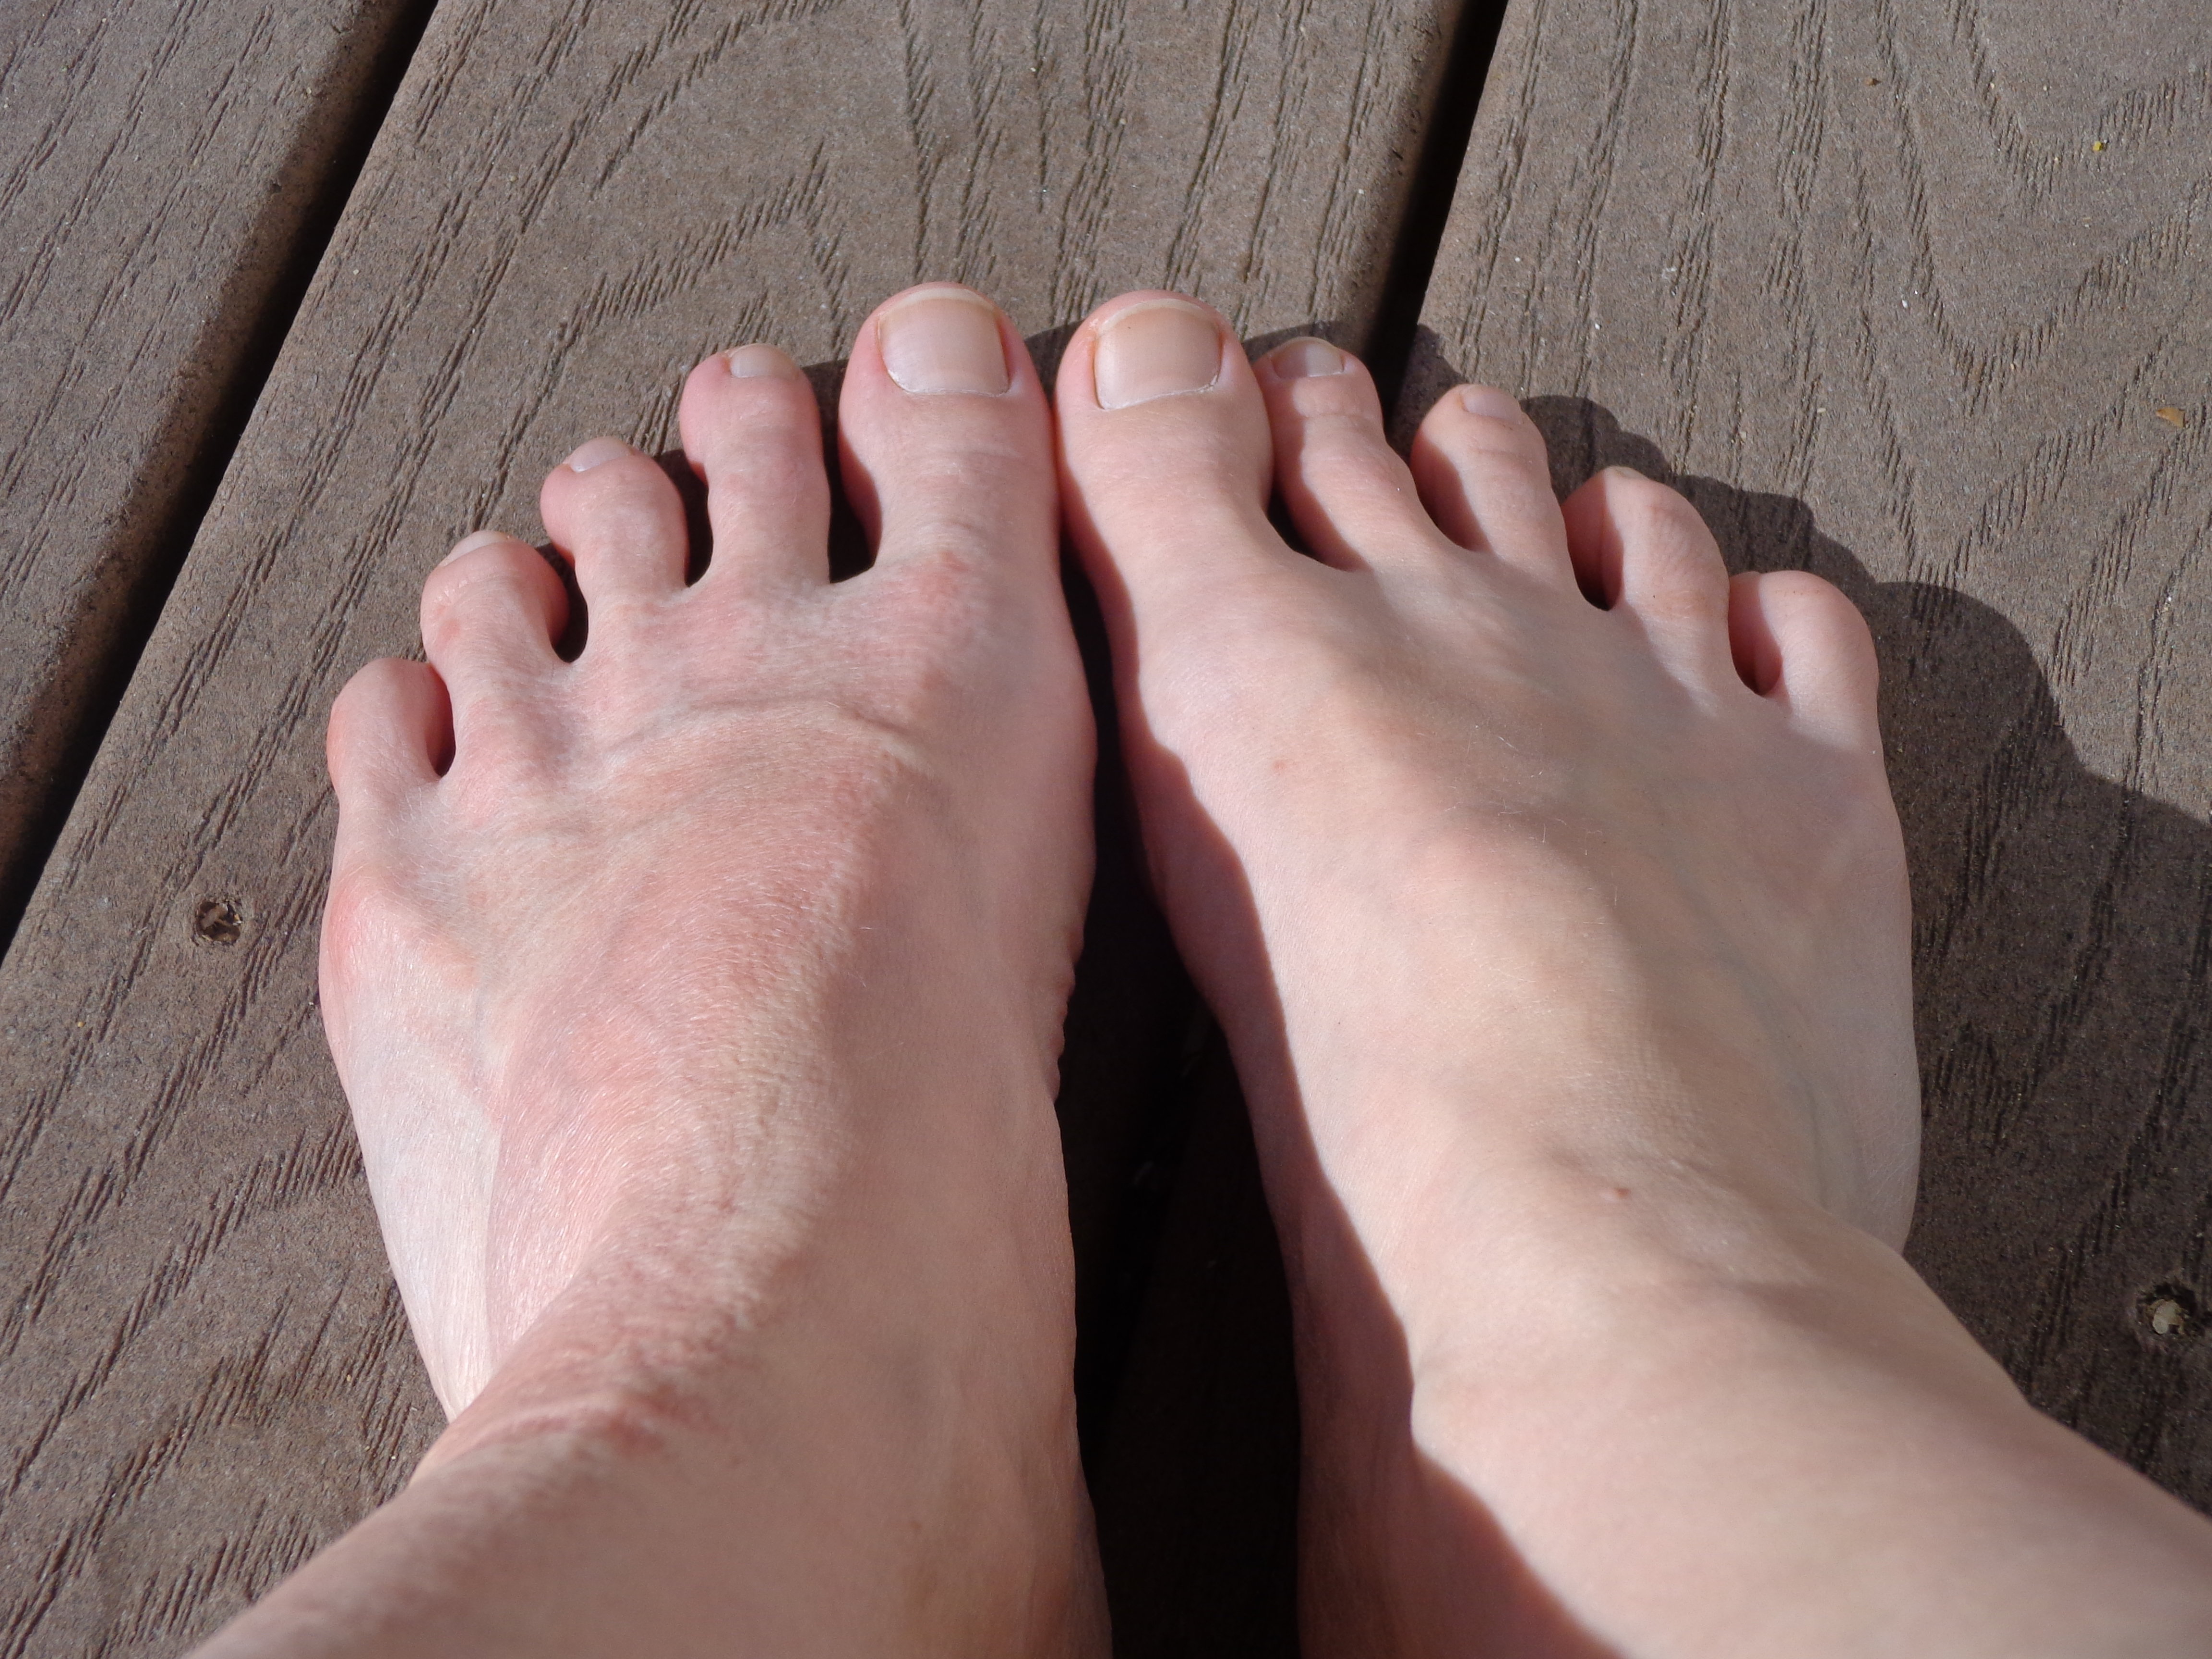 Bare foot beauty Photograph by Tos - Pixels